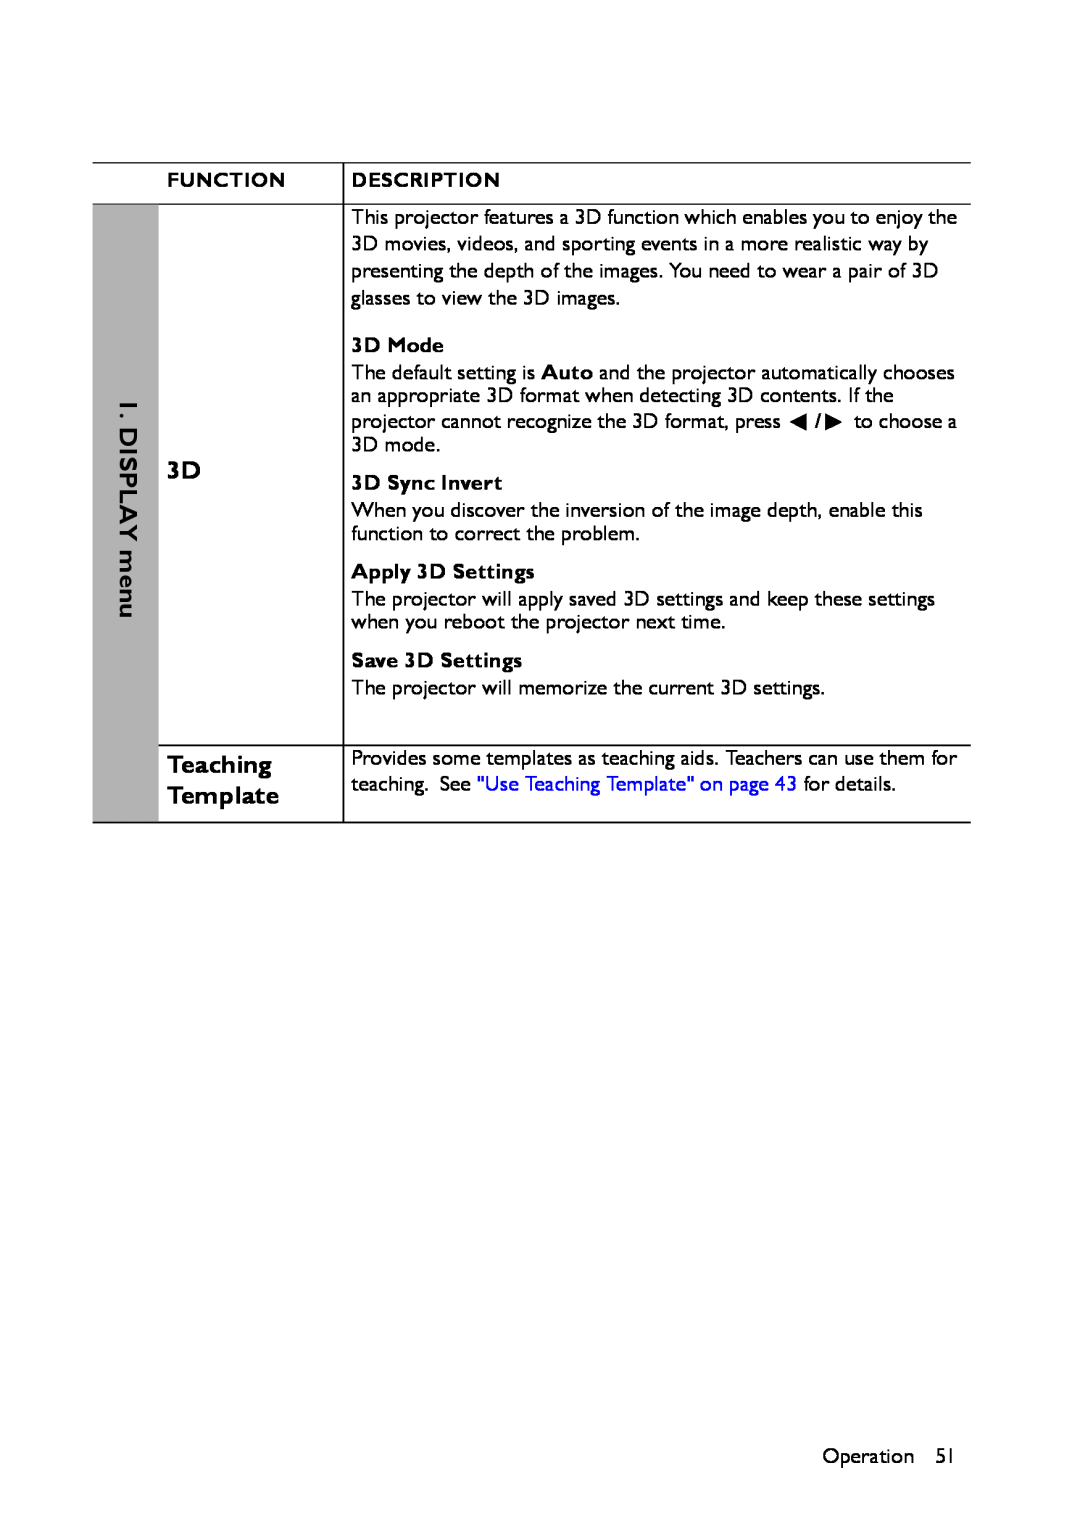 BenQ MS521 user manual teaching. See Use Teaching Template on page 43 for details 